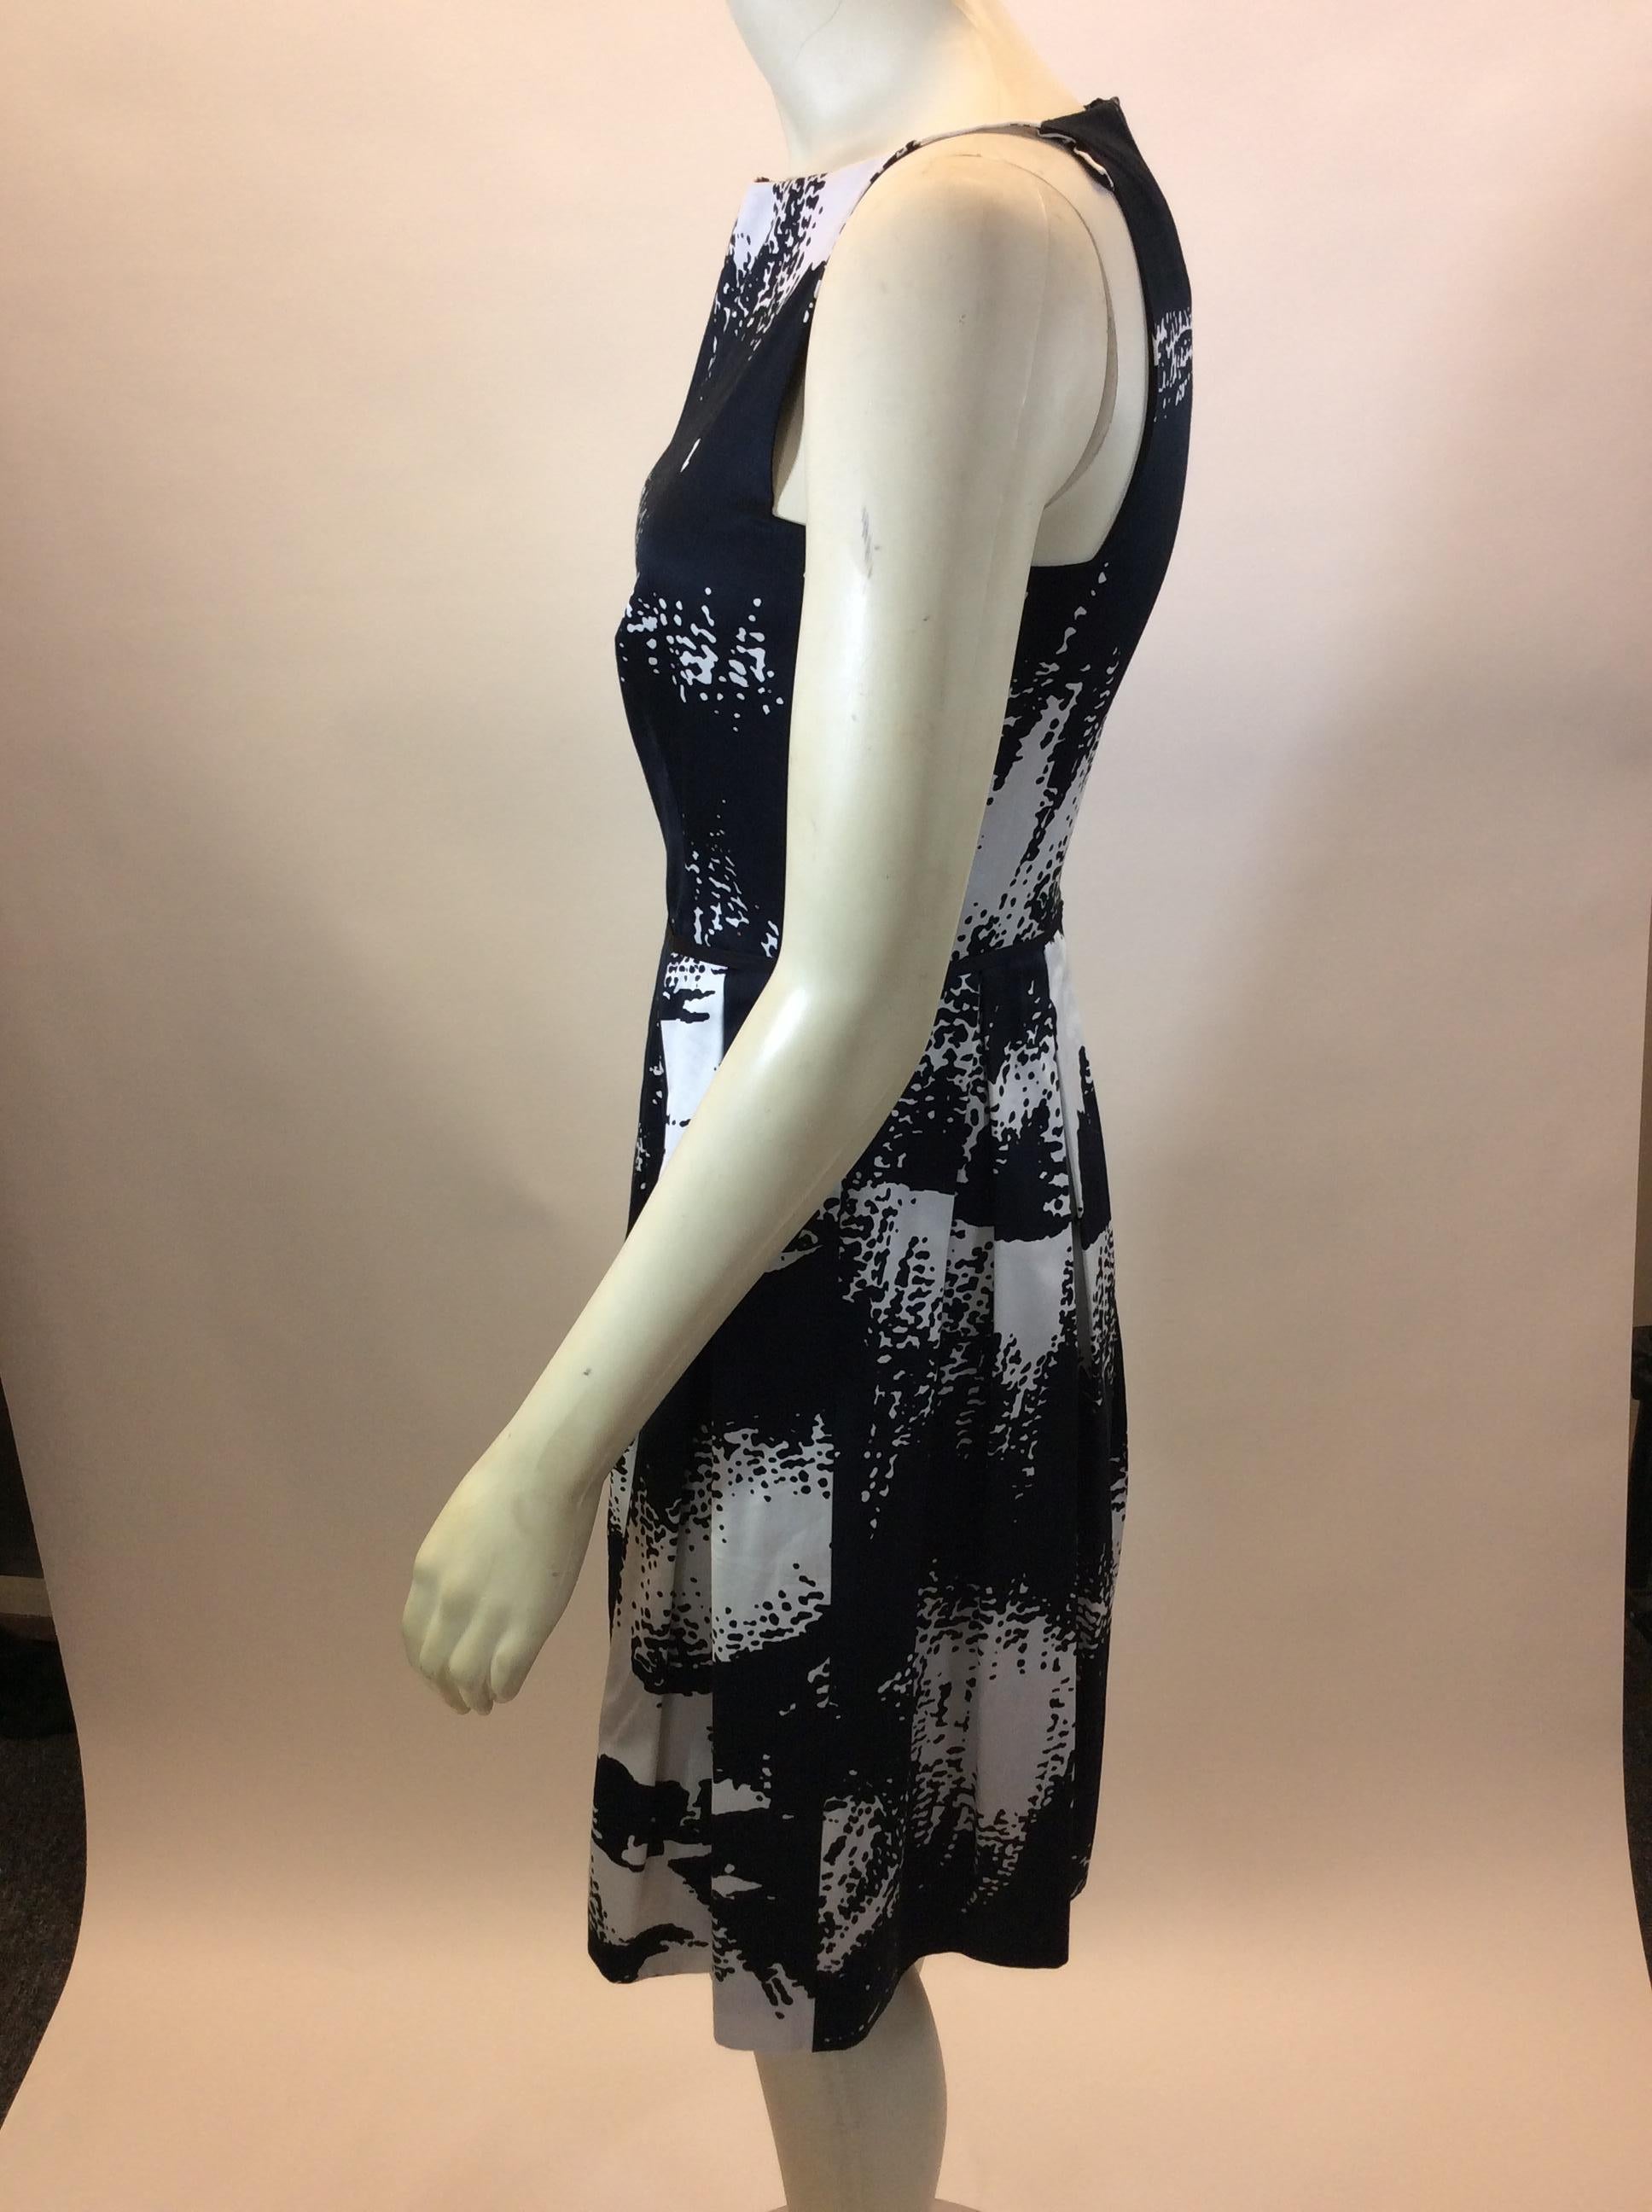 Max Mara Black and White Print Dress
$165
Made in Italy
100% Cotton
Size 4
Length 35.5